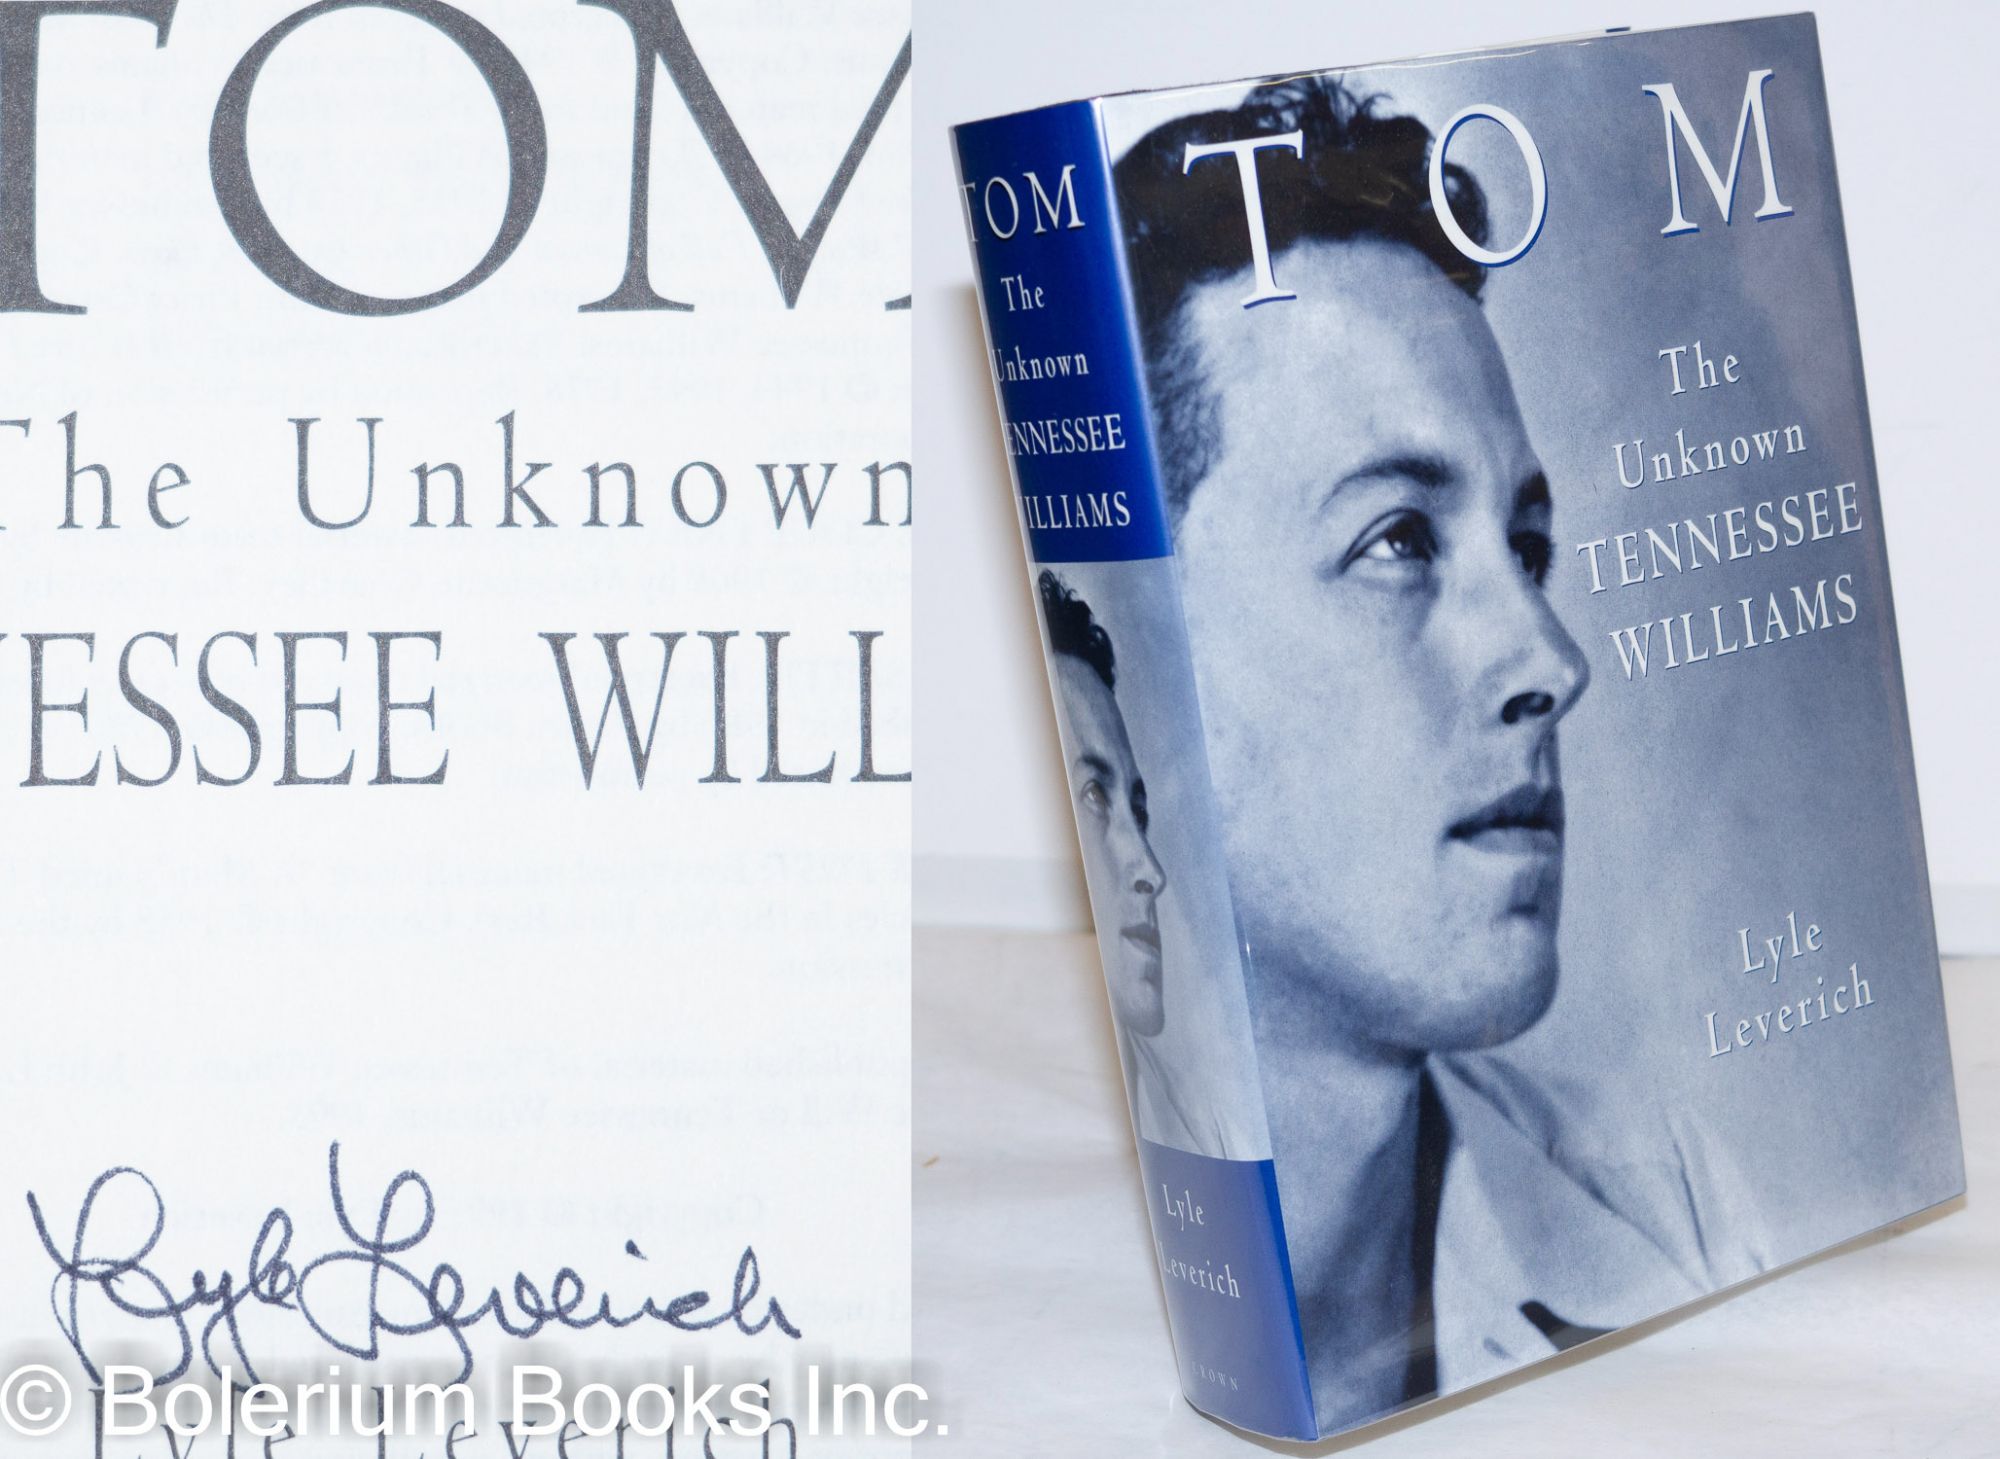 Tom: the unknown Tennessee Williams [signed] - [Williams, Tennessee] Lyle Leverich